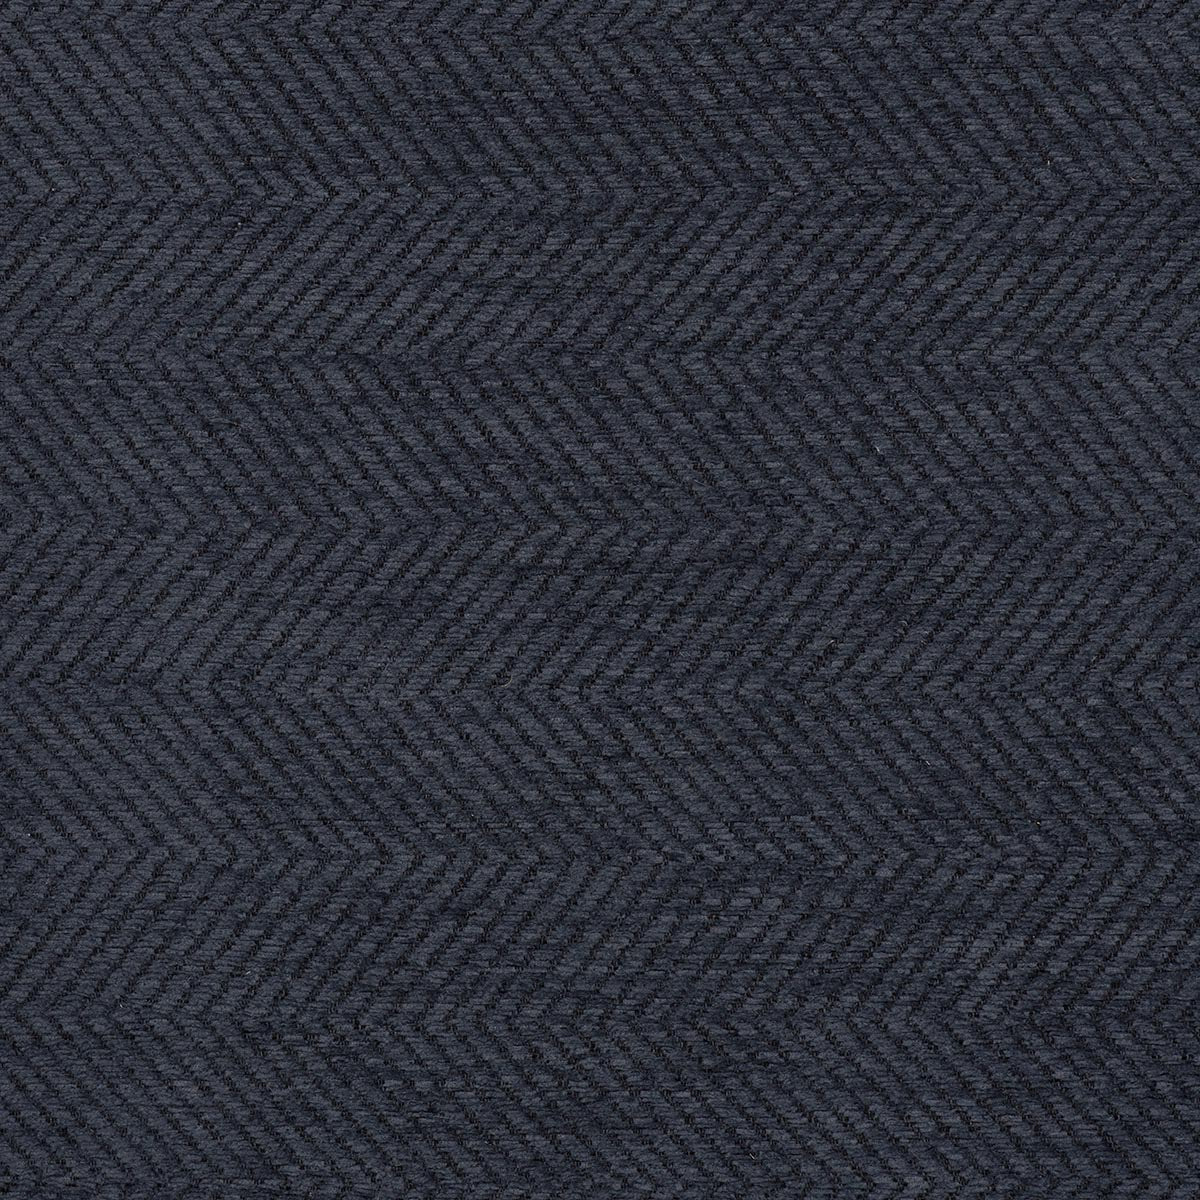 Purchase Mag Fabric Product# 10554 Insideout Kenzie Uniform Fabric